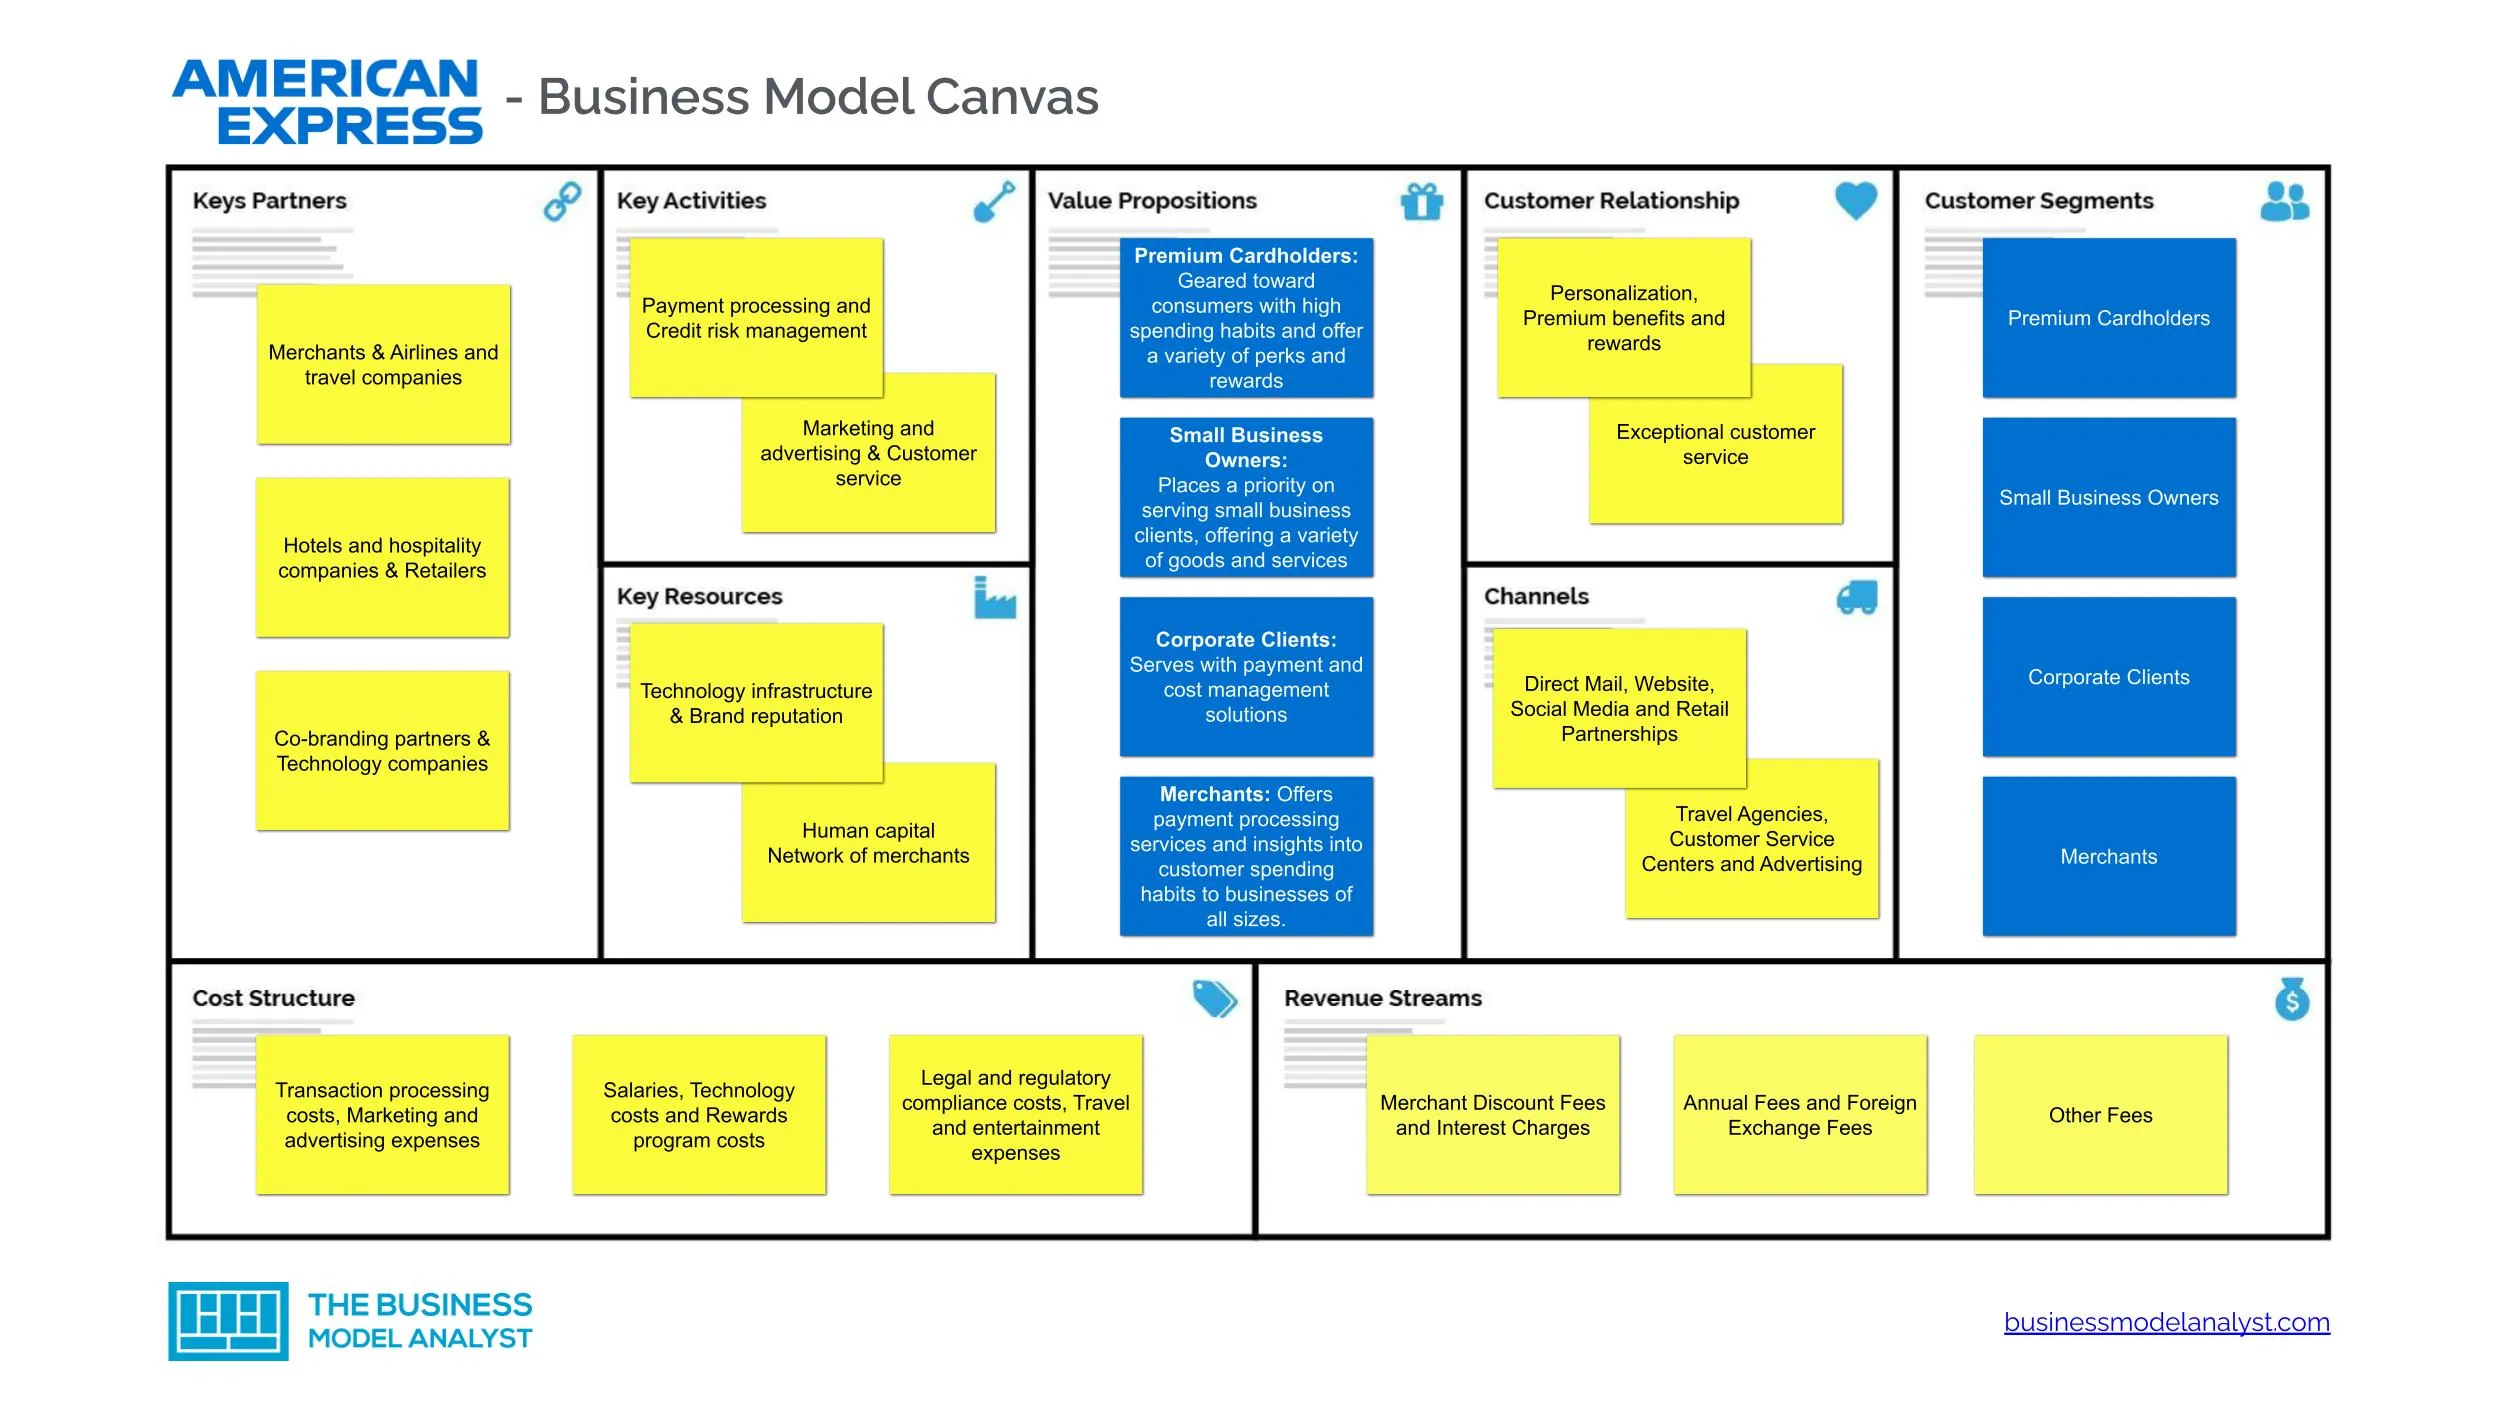 American Express Business Model